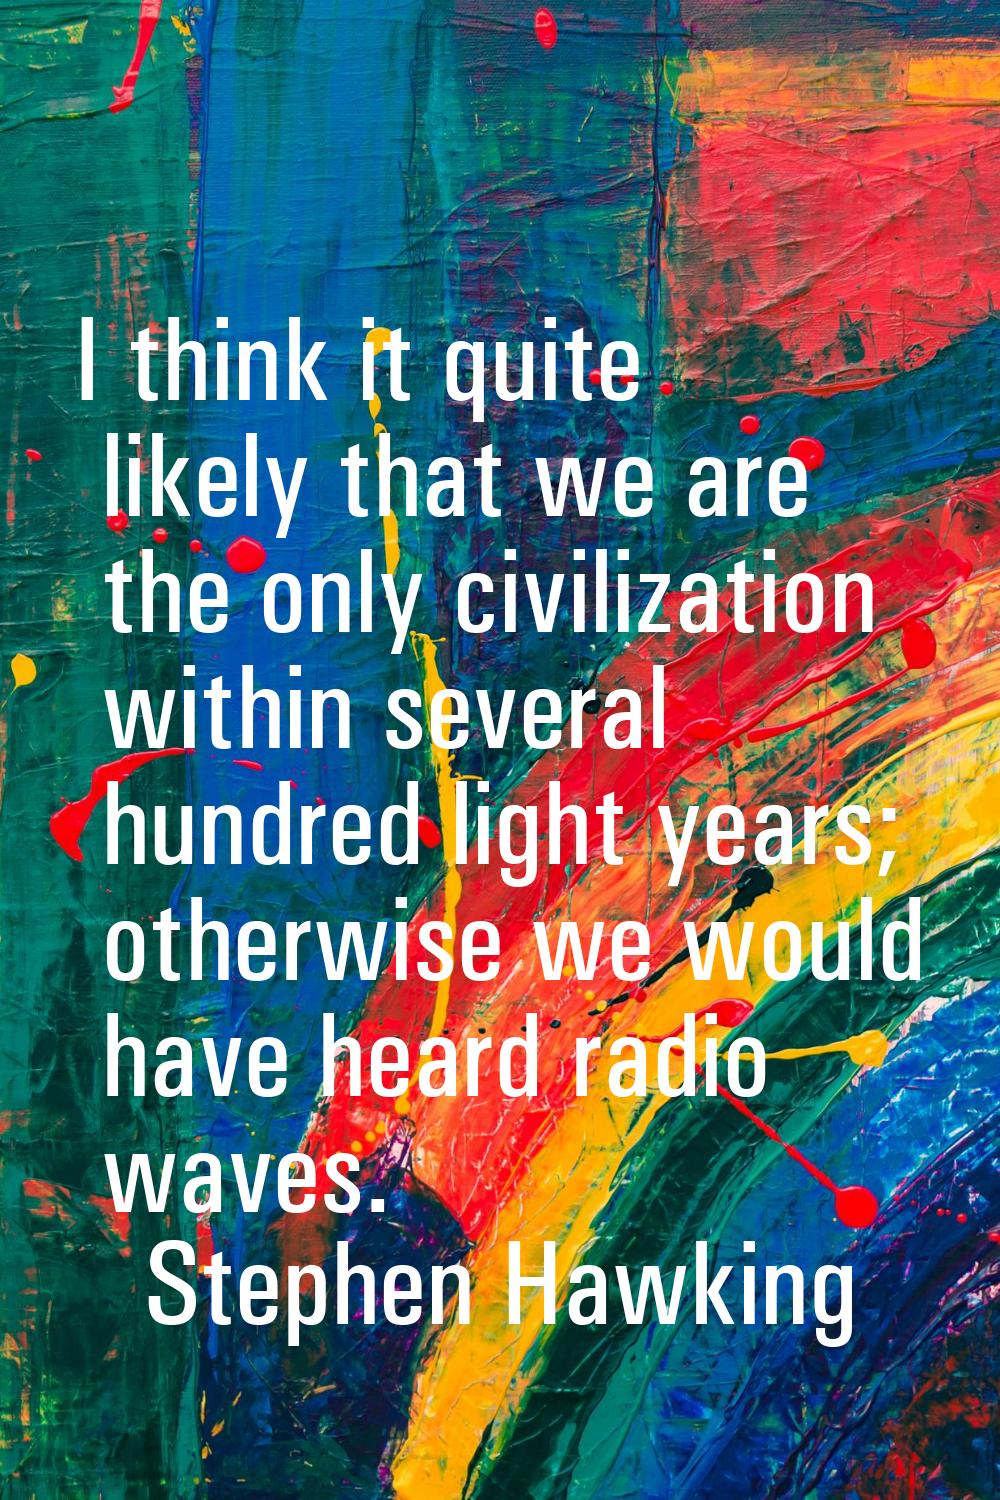 I think it quite likely that we are the only civilization within several hundred light years; other